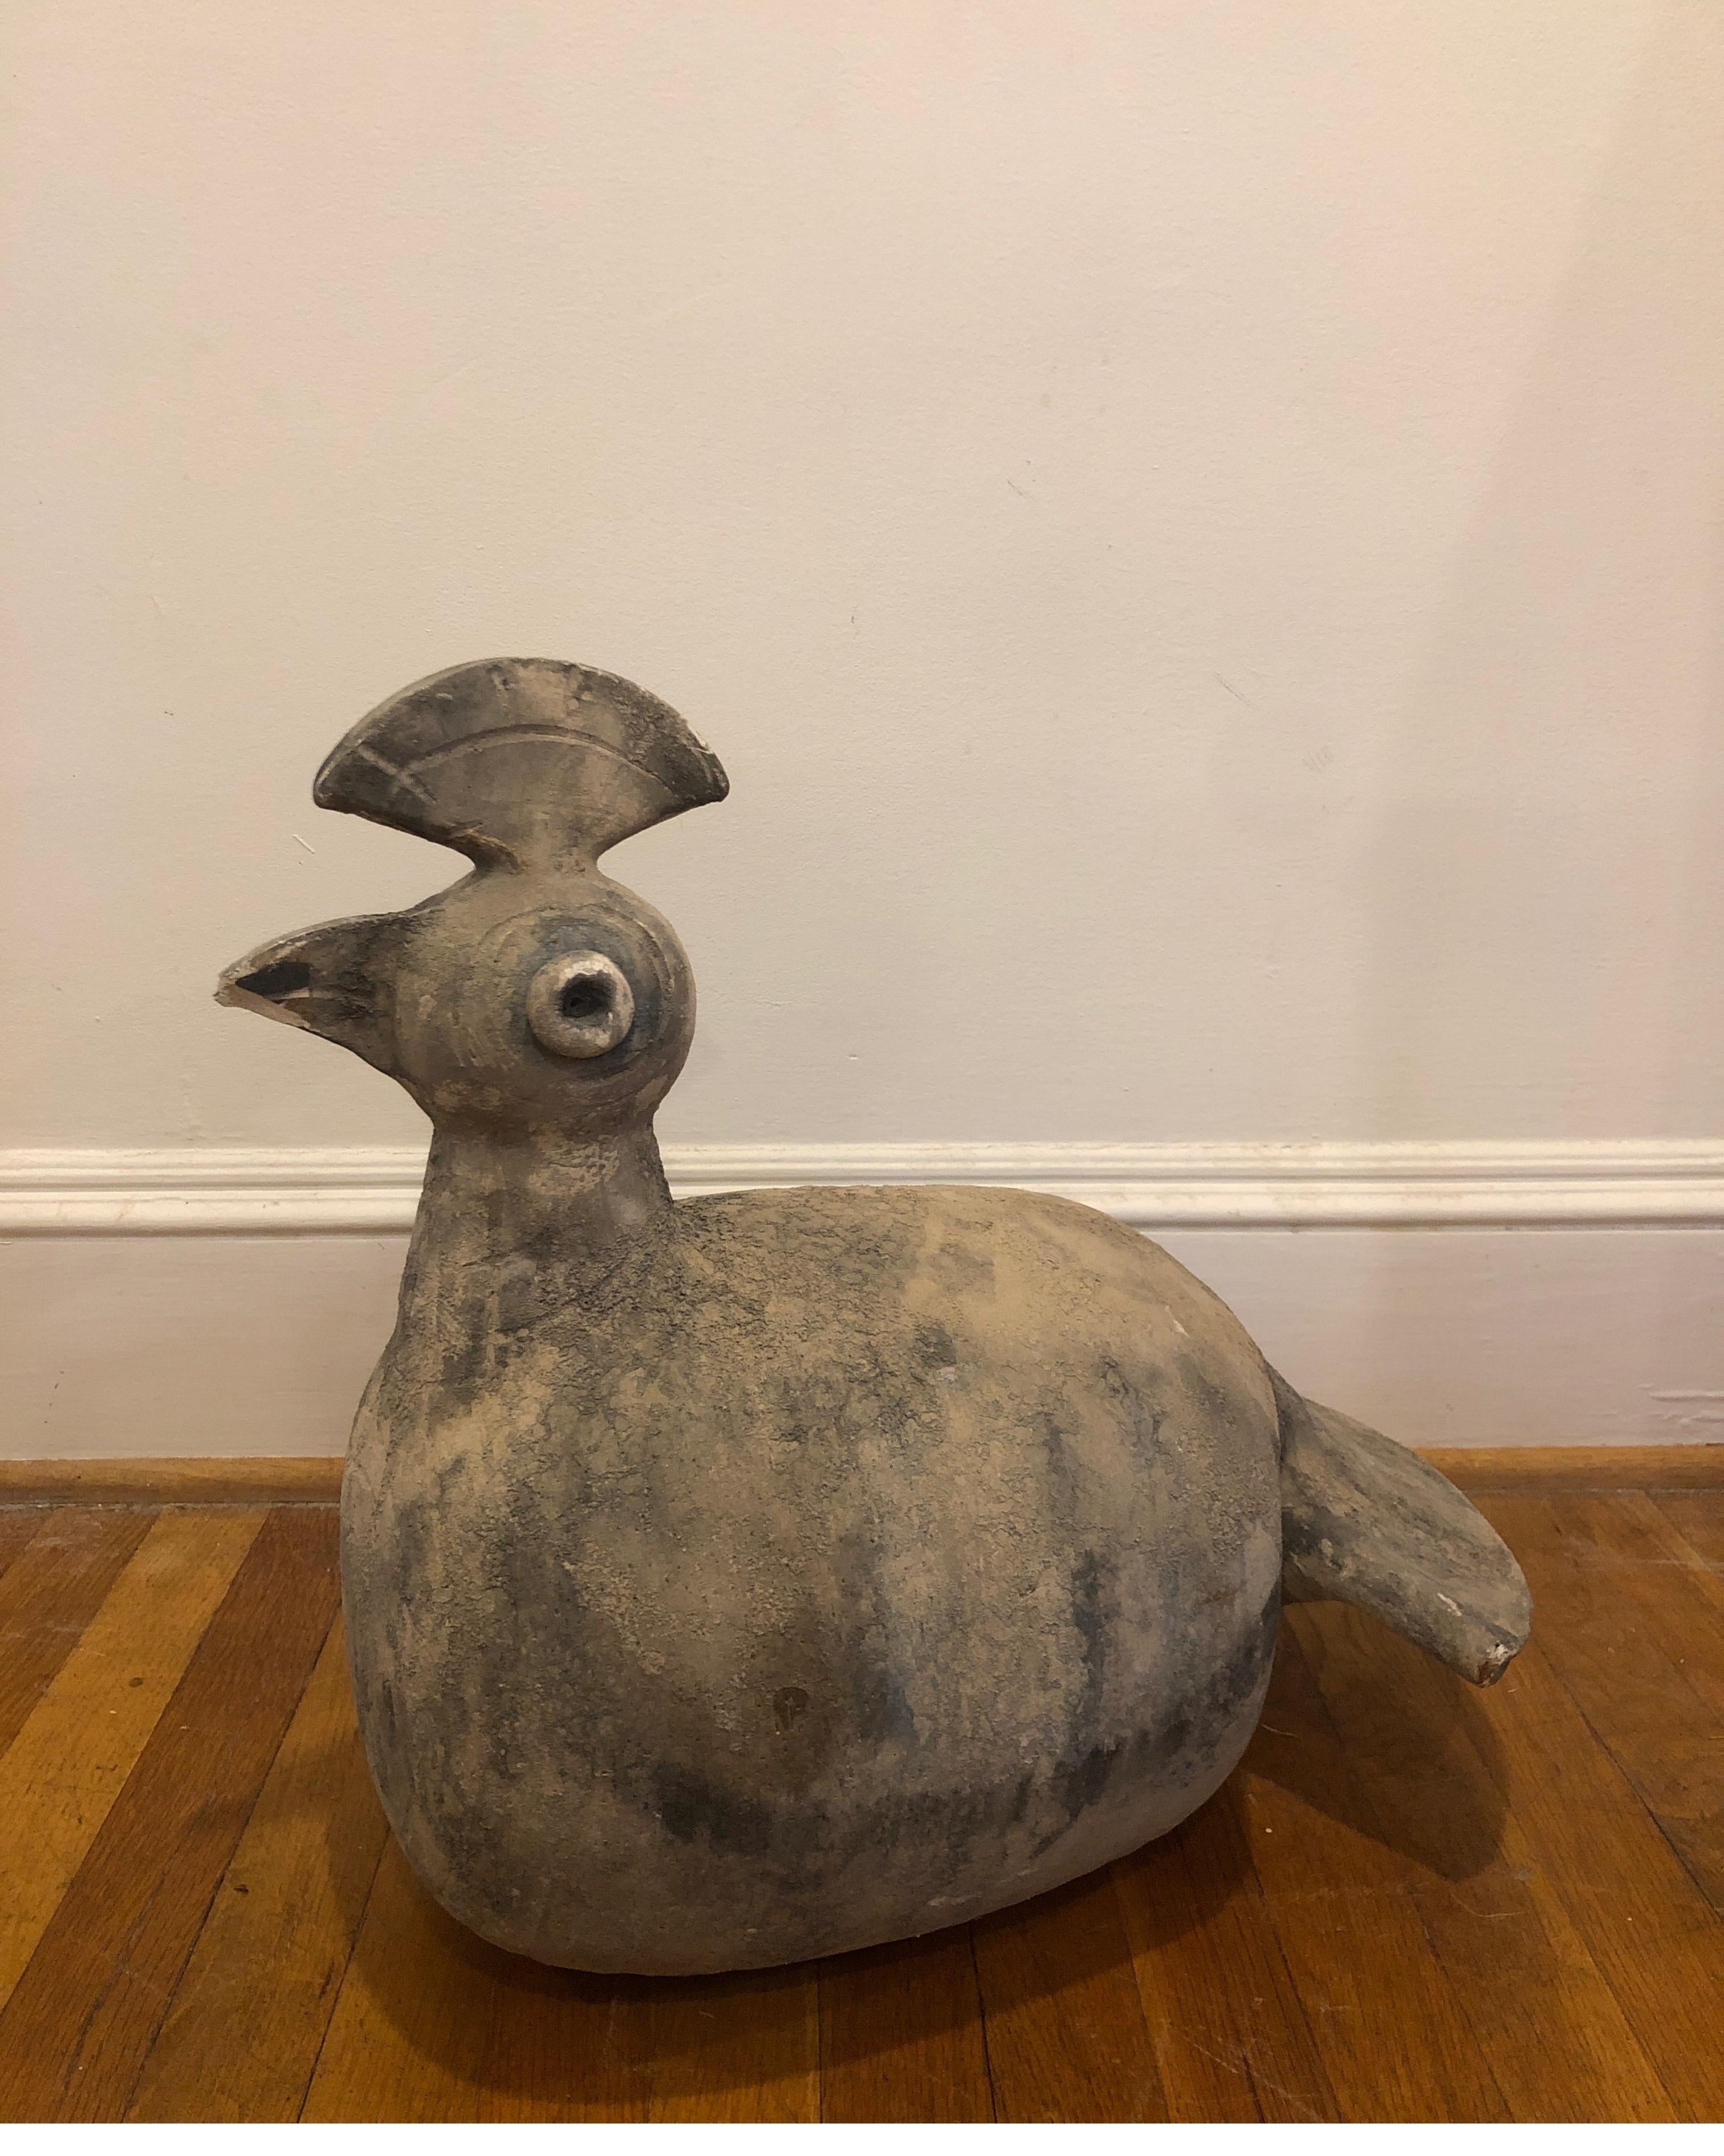 Unsigned unique piece. Very eye-catching.
Stone archaic bird sculpture.
Constructed of interesting angles around the eyes and the crown. 
The overall look is earthy tribal. 
Measures 20 L x 12 W x 18.5 H


Please note there is a chip on his